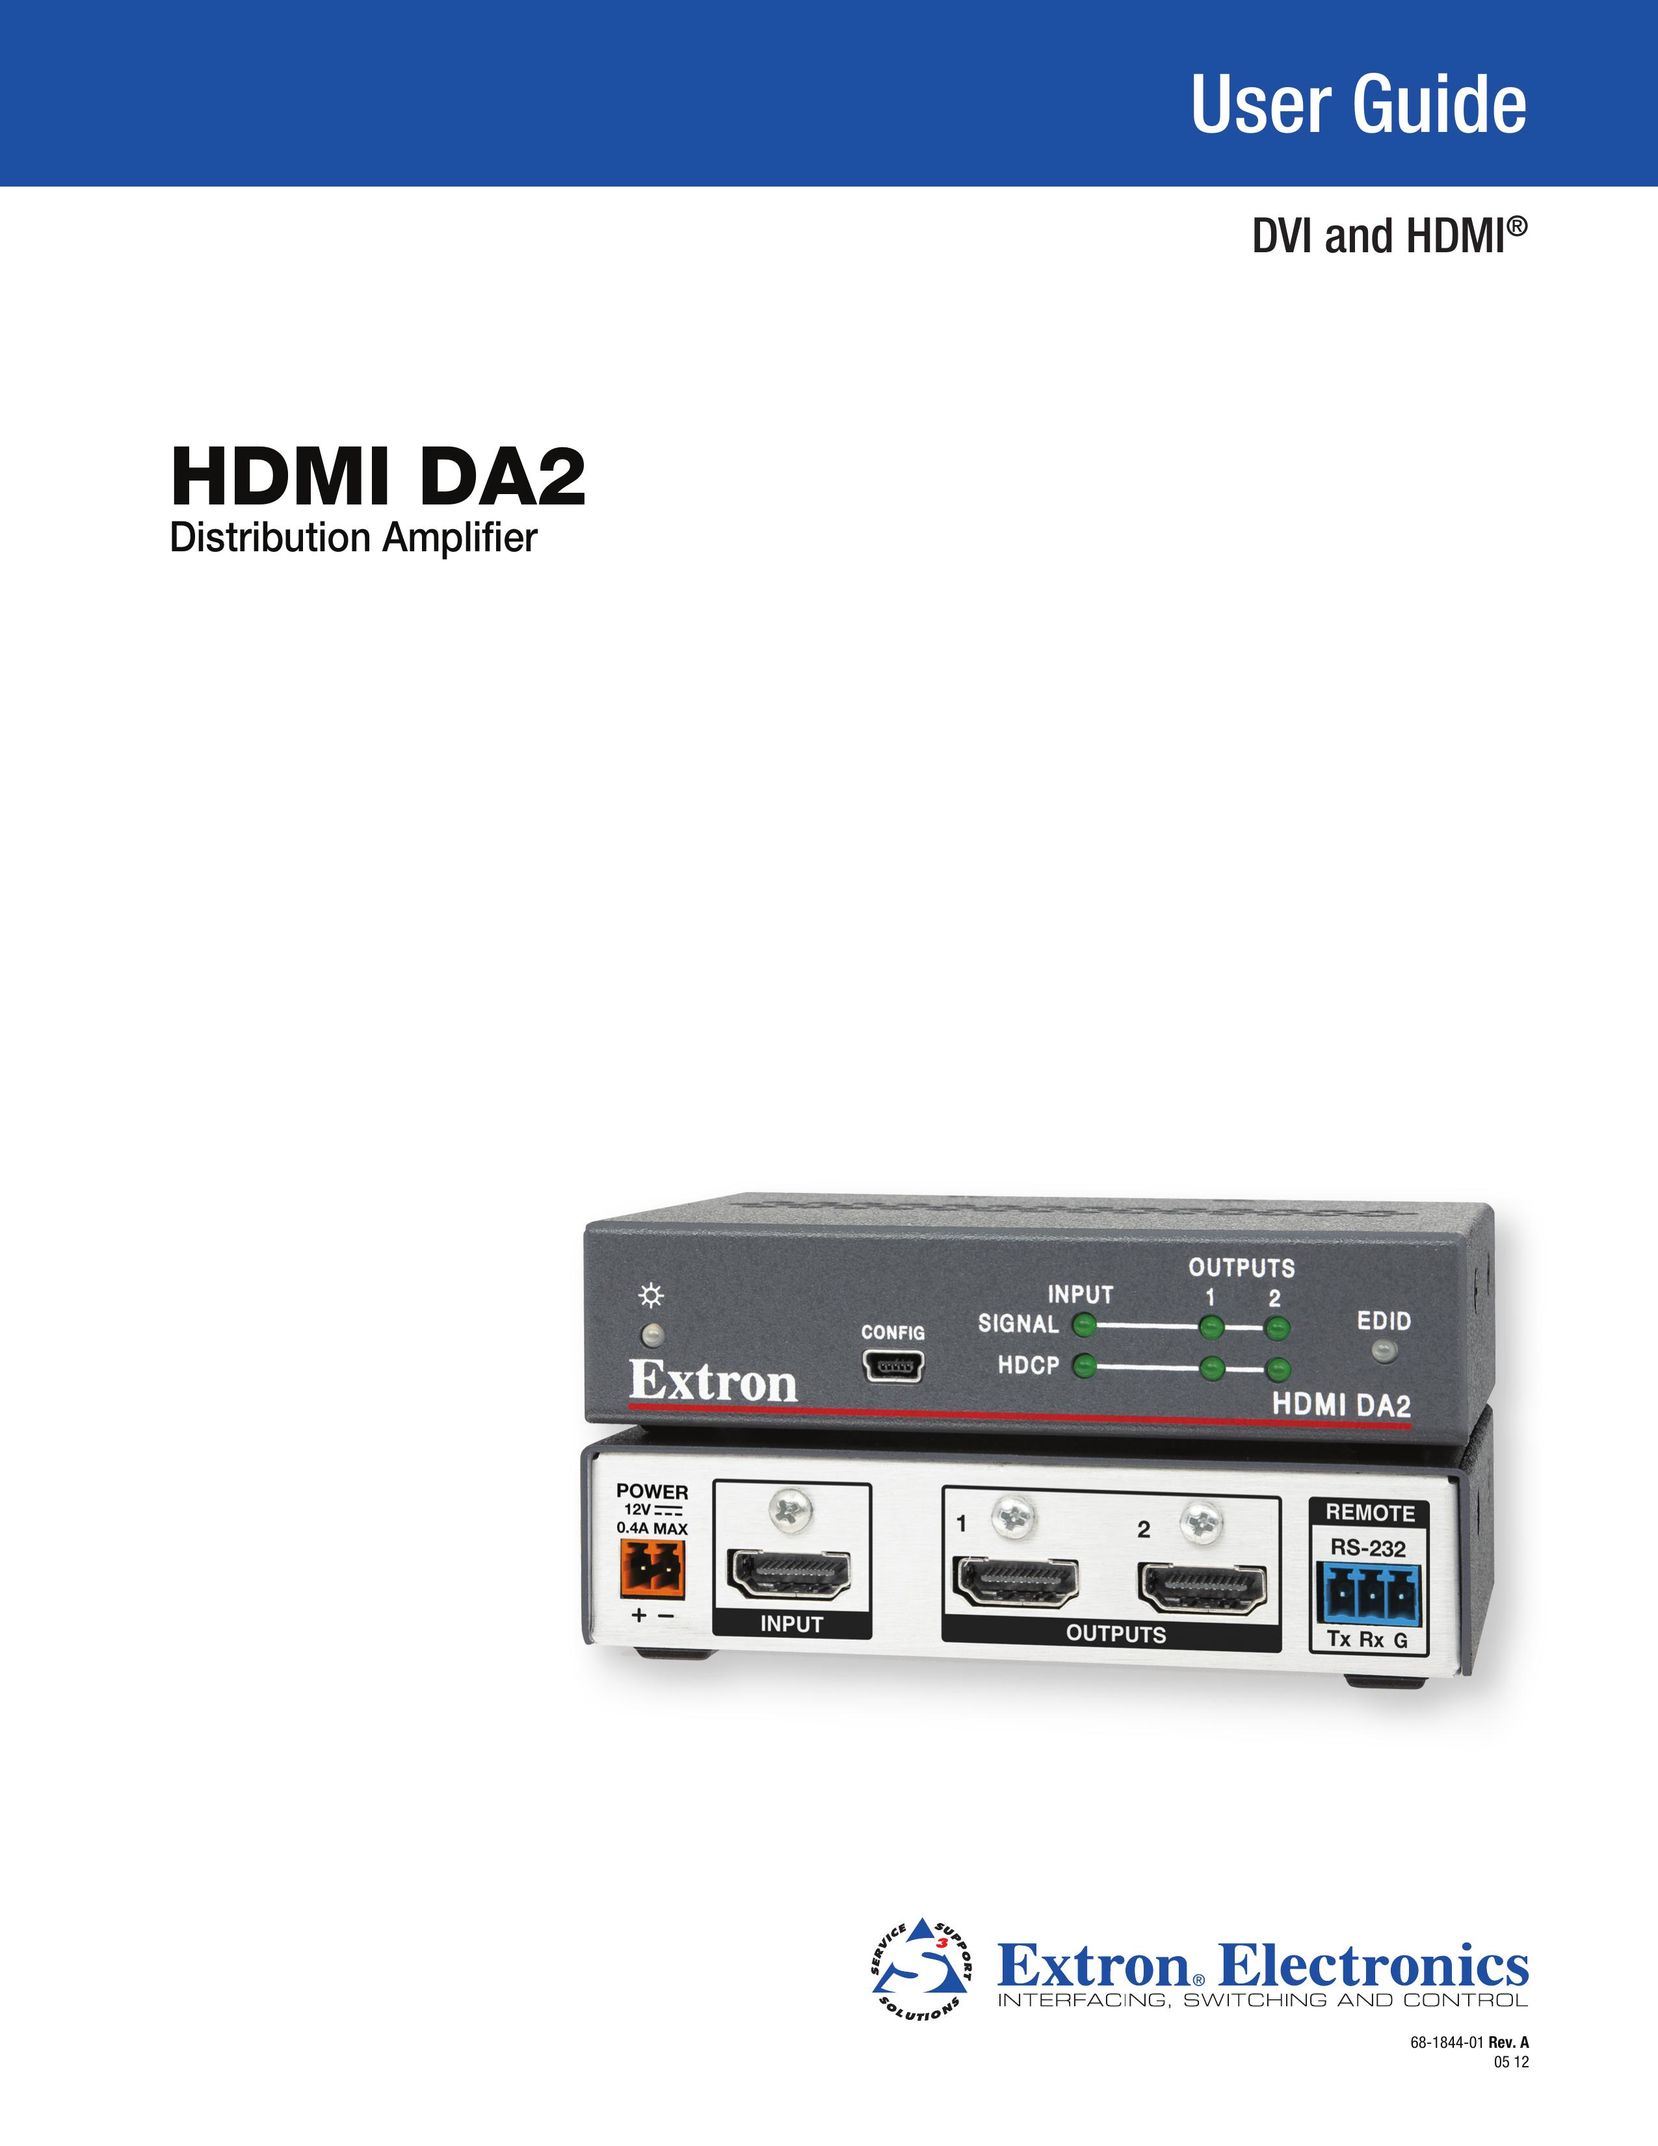 Extron electronic HDMIDA2 Network Router User Manual